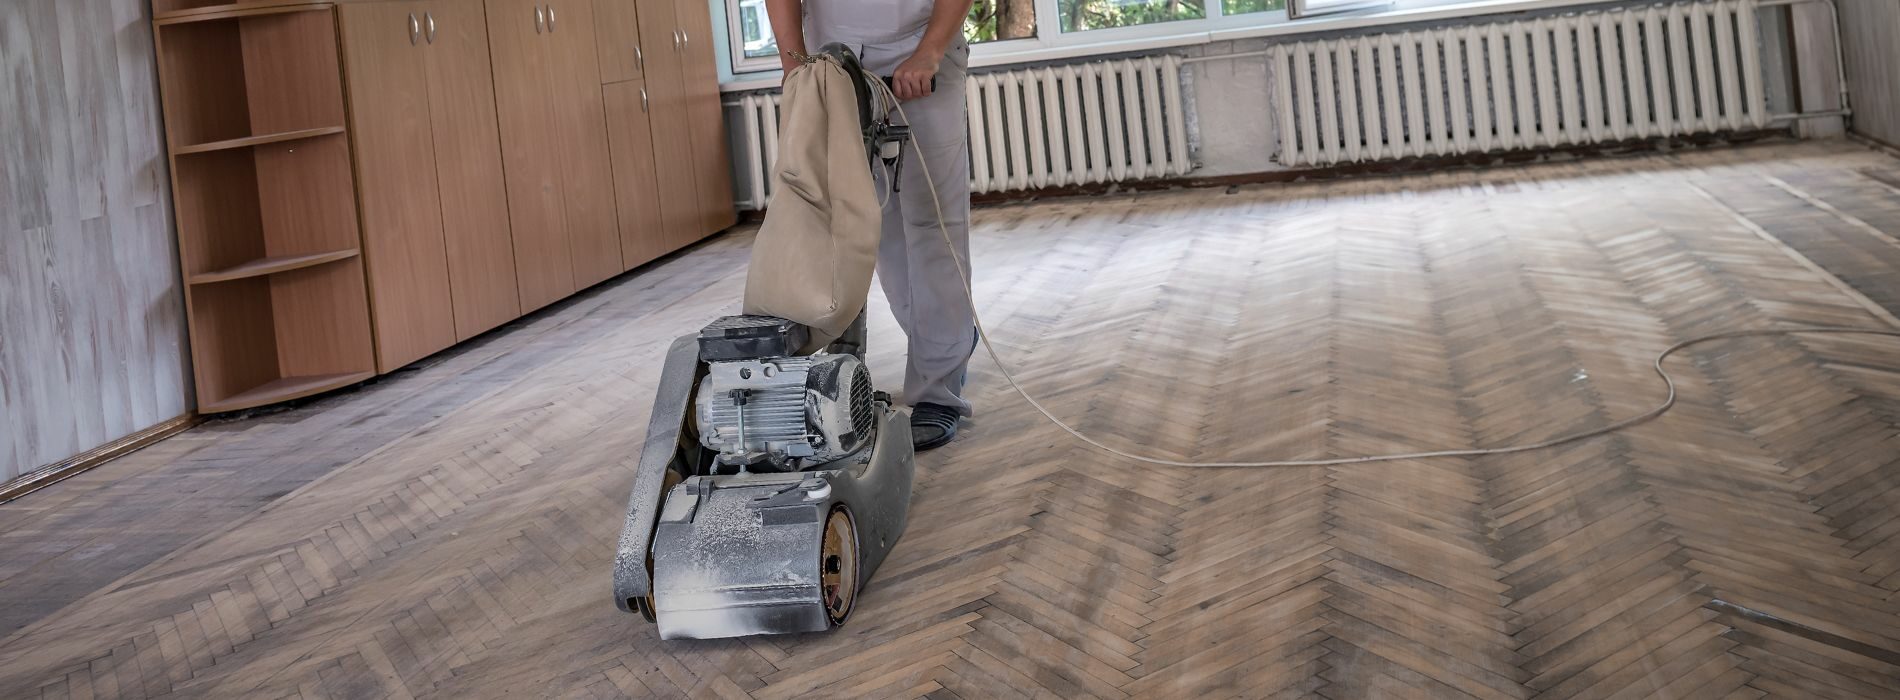 Experience professional herringbone floor sanding by Mr Sander® using the powerful Bona Belt Lite in Camberwell, SE5. With an effect of 2.2 kW, this sander operates at 230 V and 50 Hz. Measuring 200x750 mm, it ensures excellent coverage and precision.